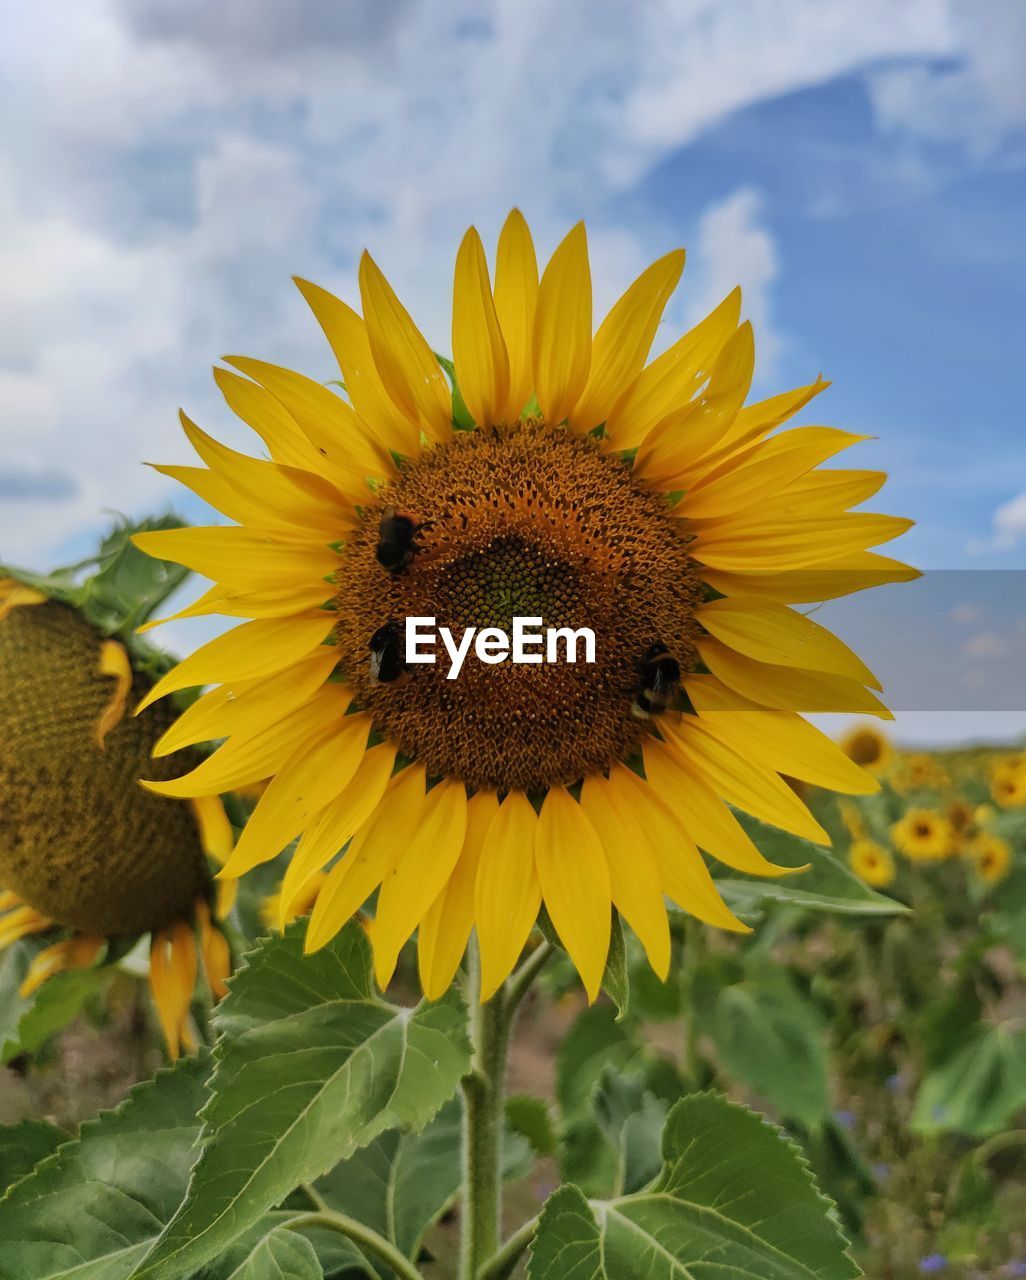 sunflower, flower, plant, flowering plant, yellow, flower head, beauty in nature, freshness, sky, cloud, nature, growth, field, petal, inflorescence, sunflower seed, landscape, fragility, close-up, plant part, rural scene, leaf, asterales, land, pollen, no people, agriculture, environment, outdoors, day, summer, botany, crop, blossom, focus on foreground, farm, springtime, animal wildlife, scenics - nature, wildflower, animal, vegetarian food, sunlight, seed, animal themes, vibrant color